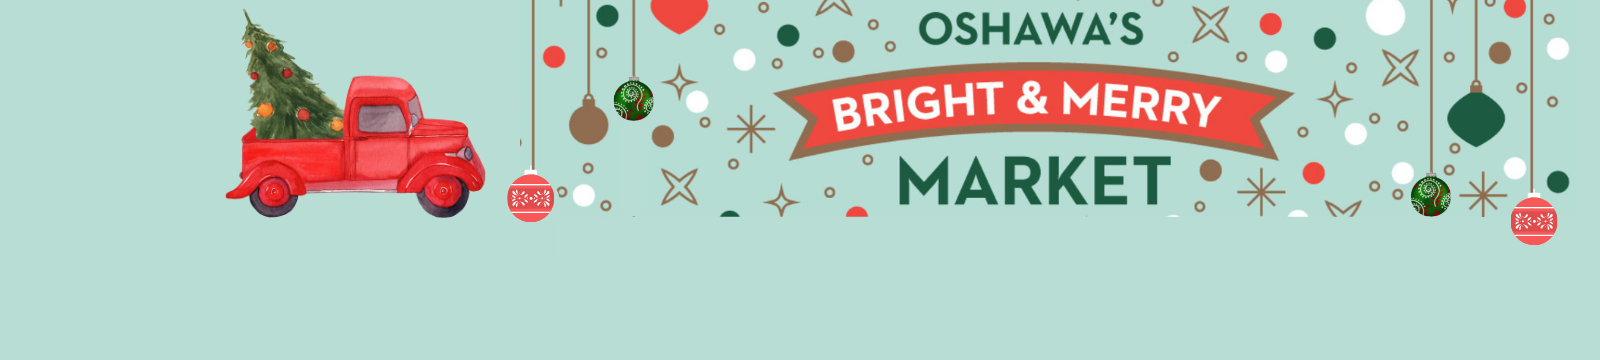 Bright and Merry Banner